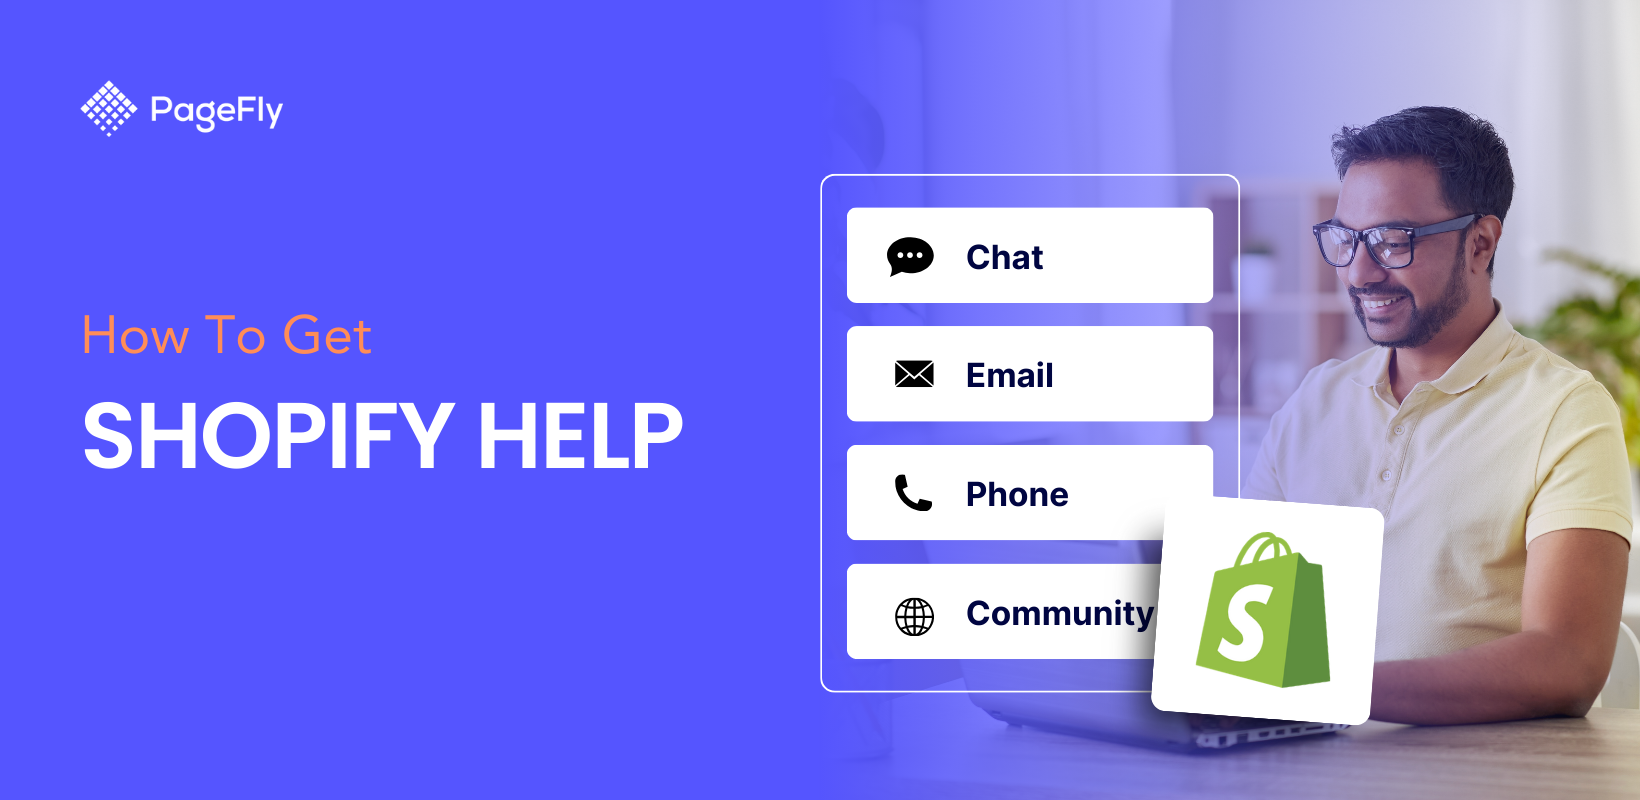 How To Get Shopify Help? 7 Effective Ways To Make Ecommerce Easier For You